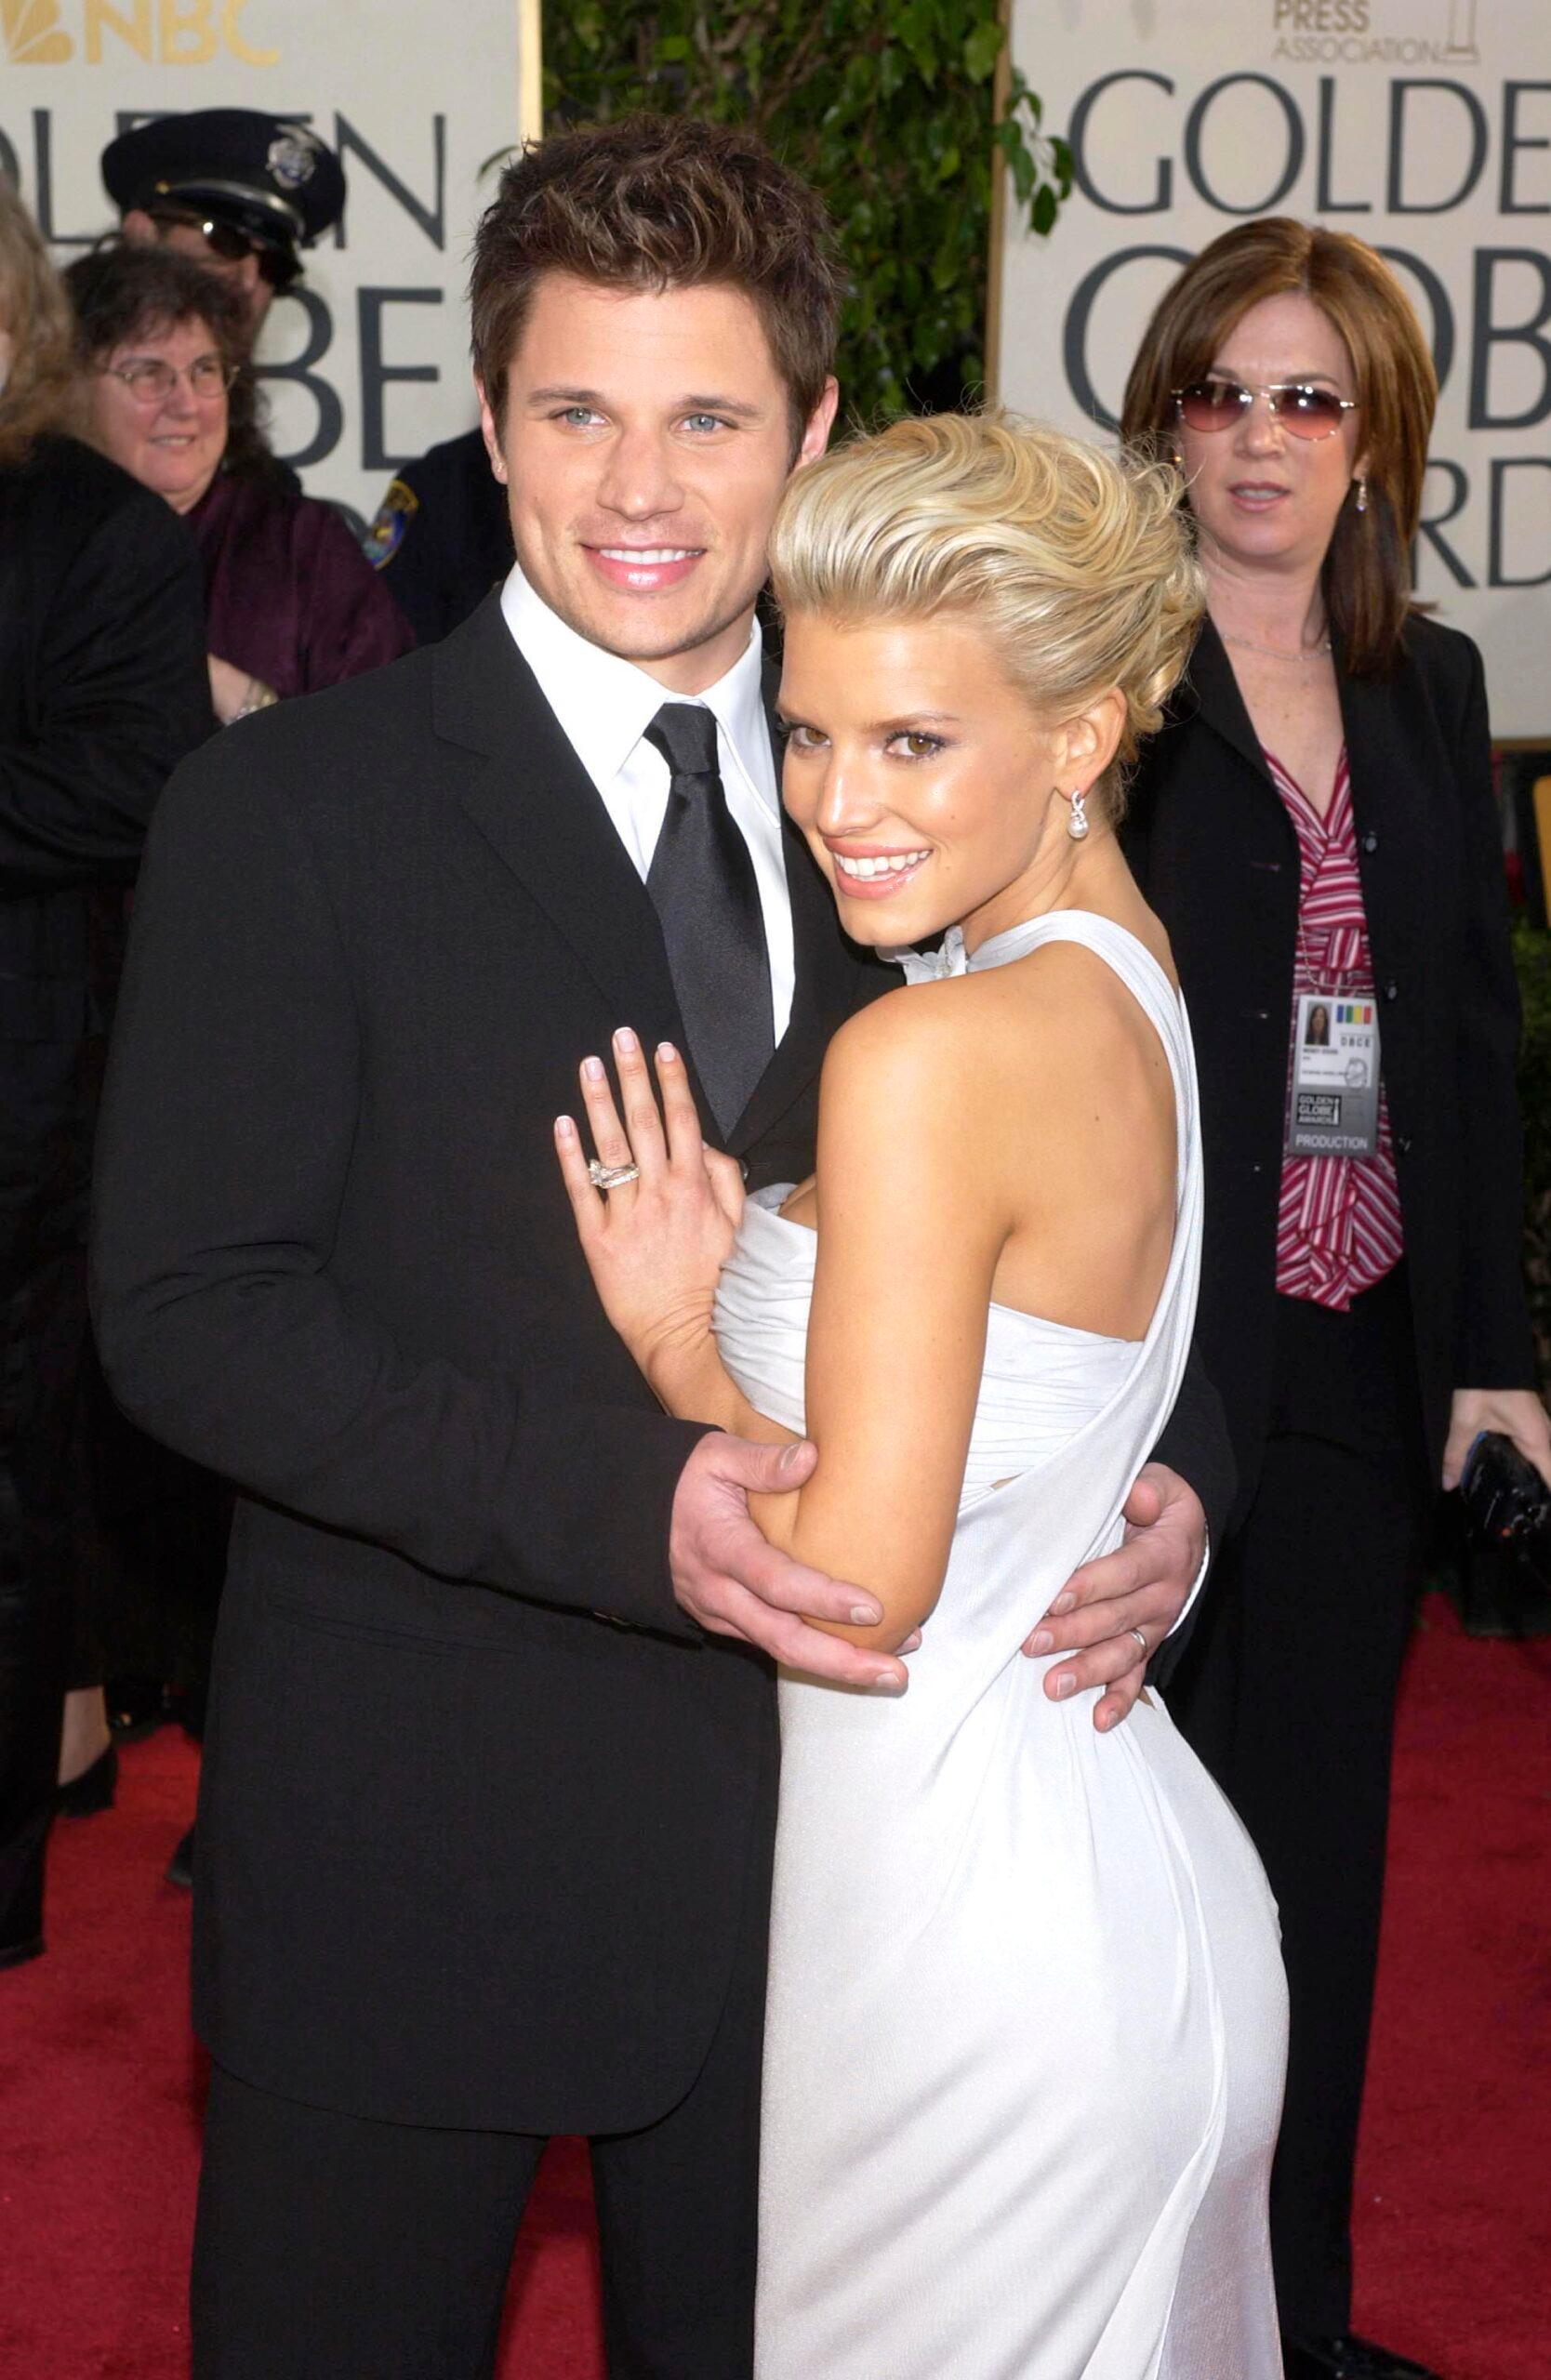 Jessica Simpson and Nick Lachey on the red carpet